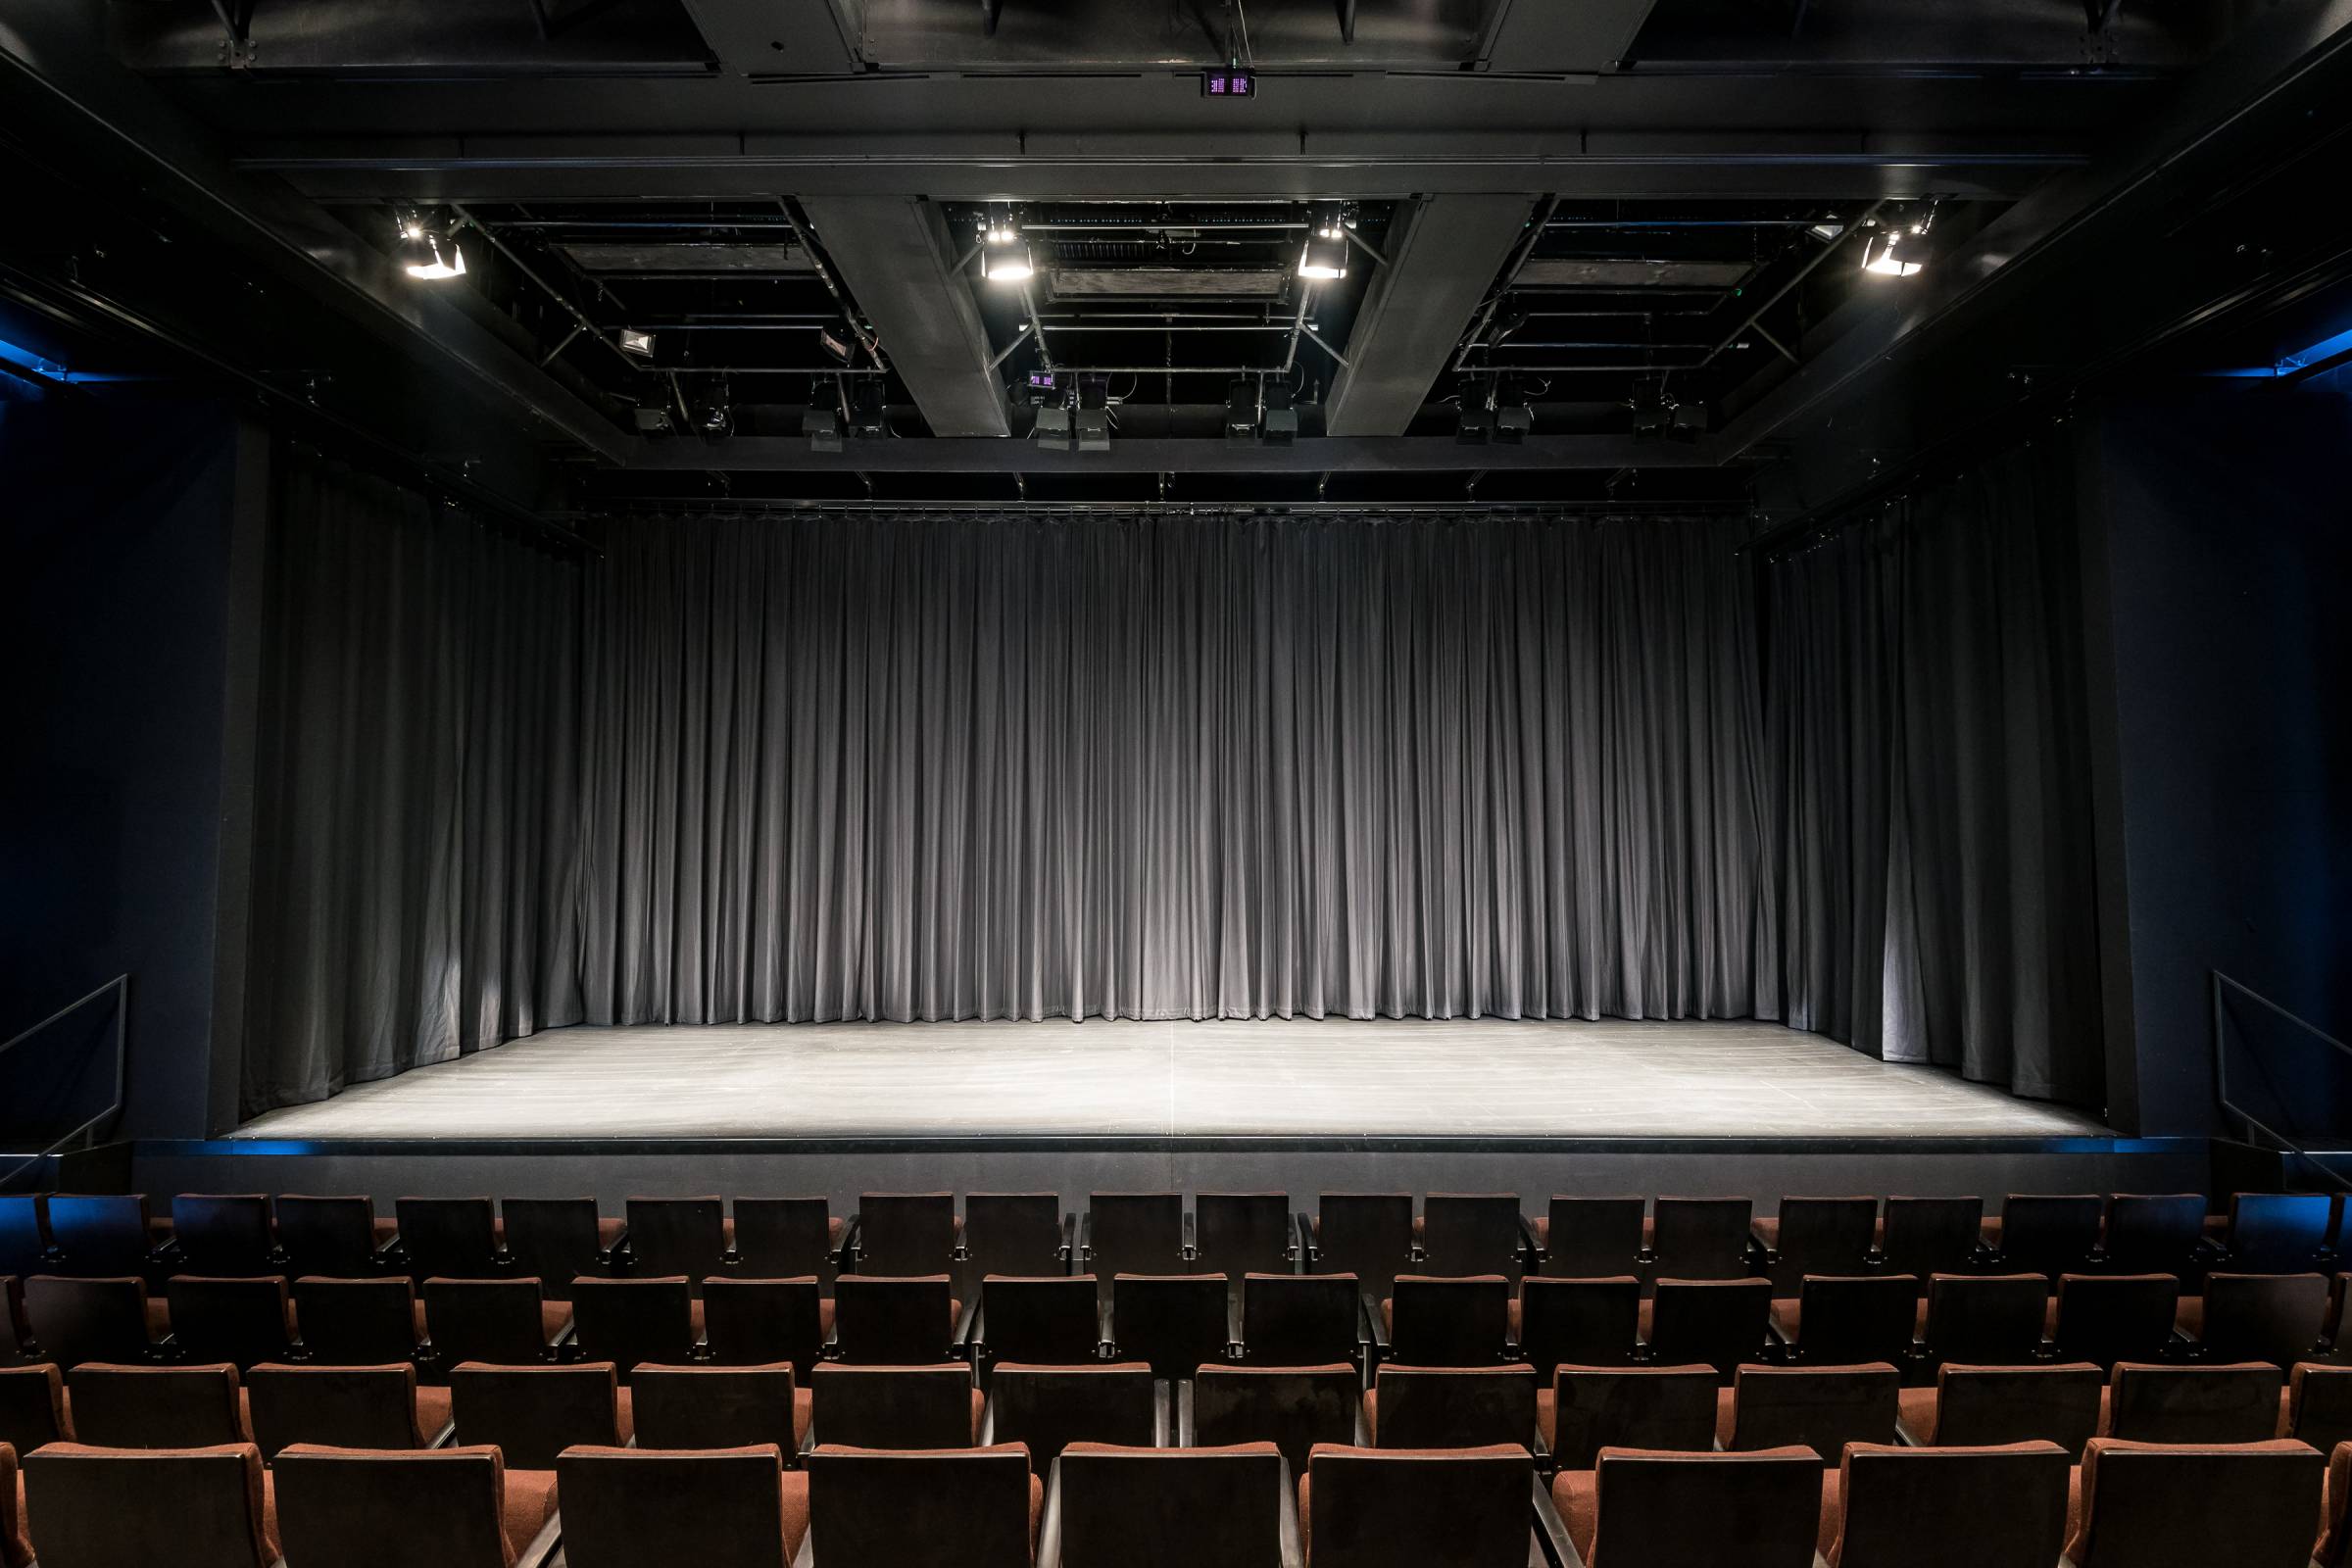 The stage at the Cremorne Theatre QPAC